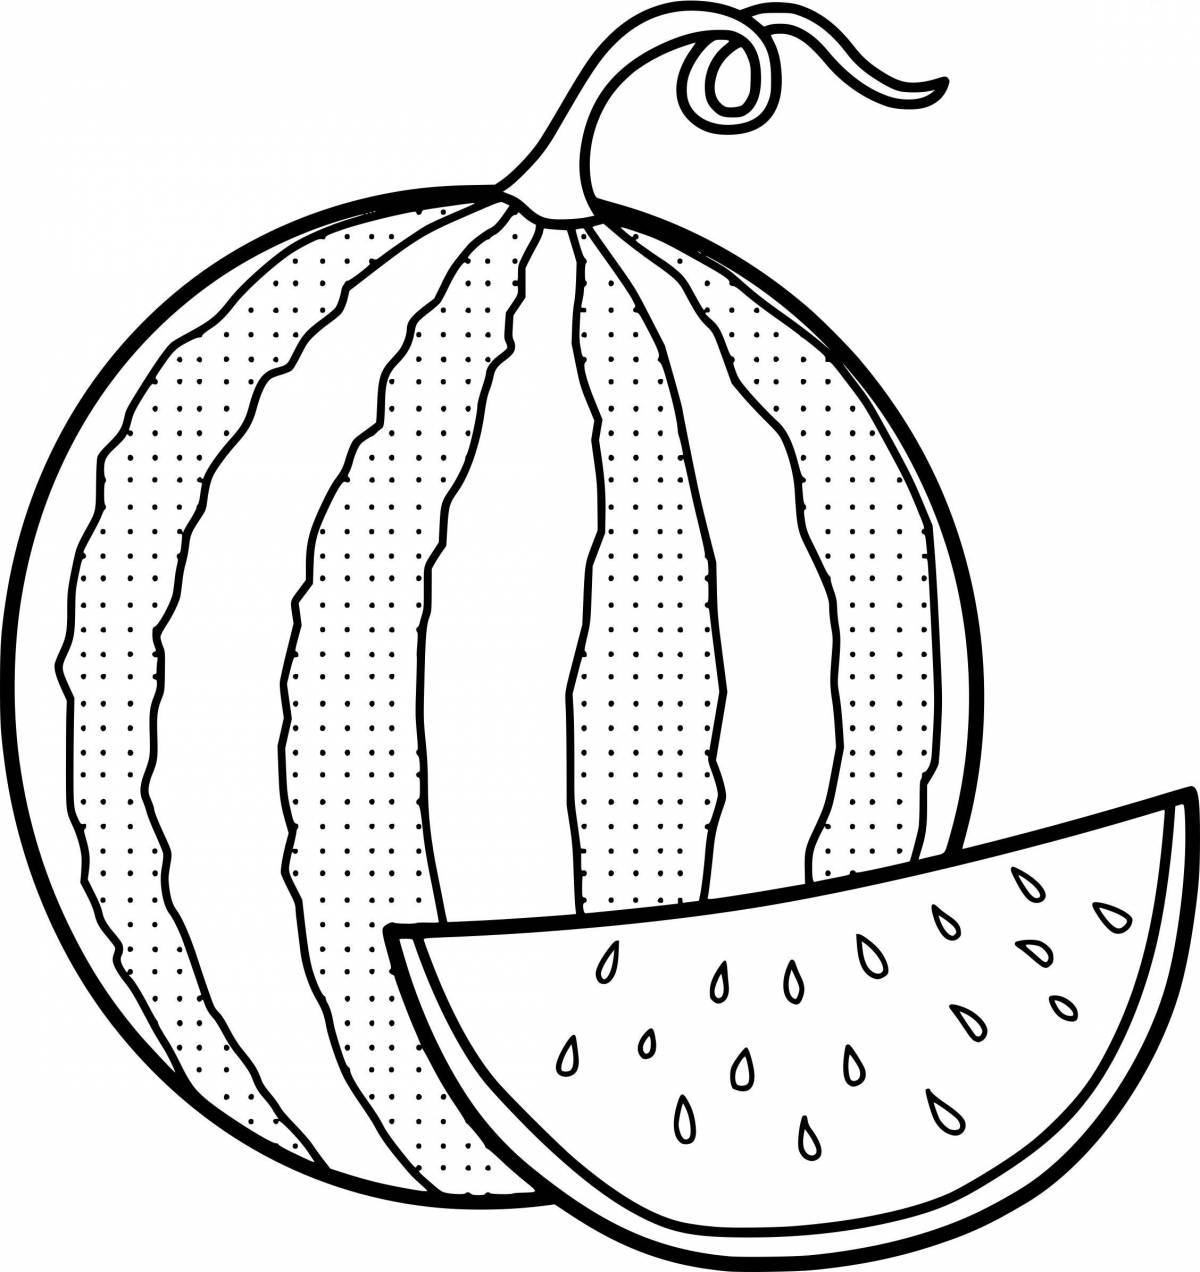 Fabulous watermelon coloring pages for kids